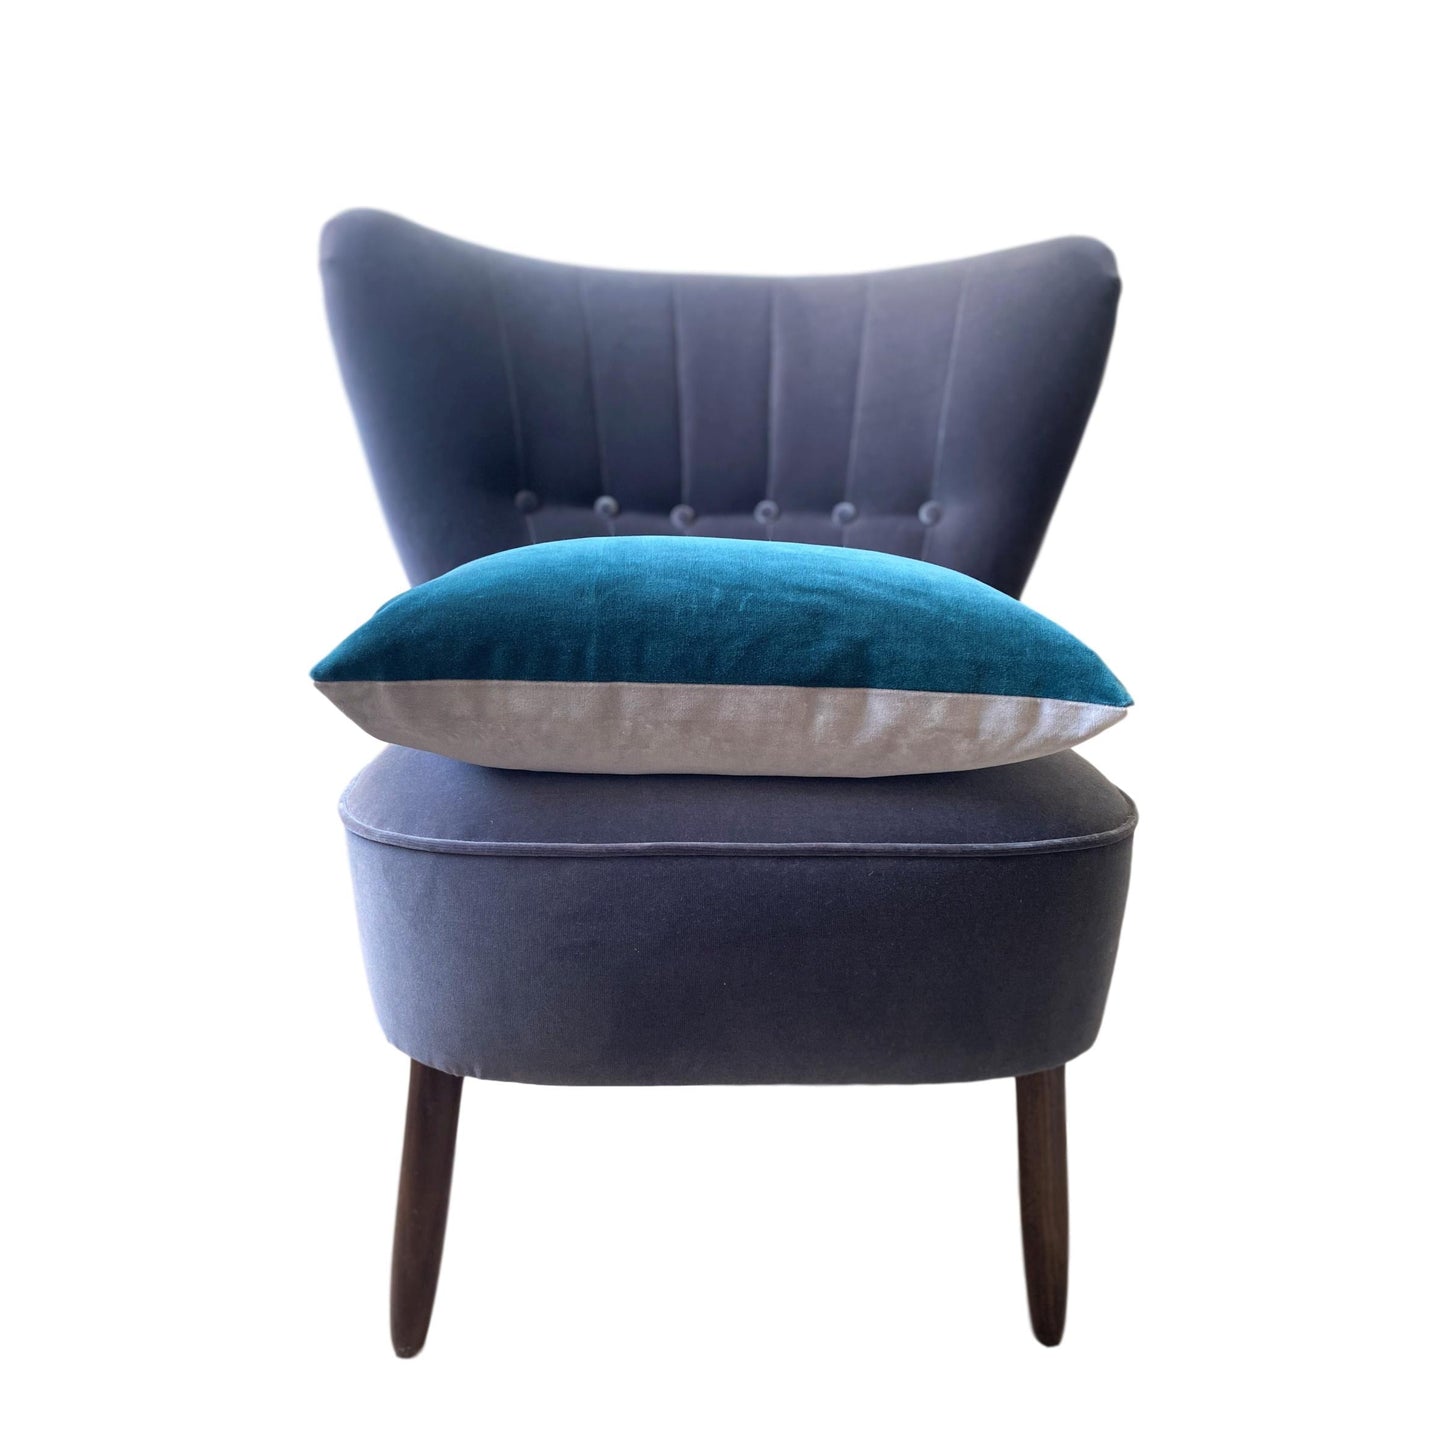 Teal and grey cushions by luxe 39